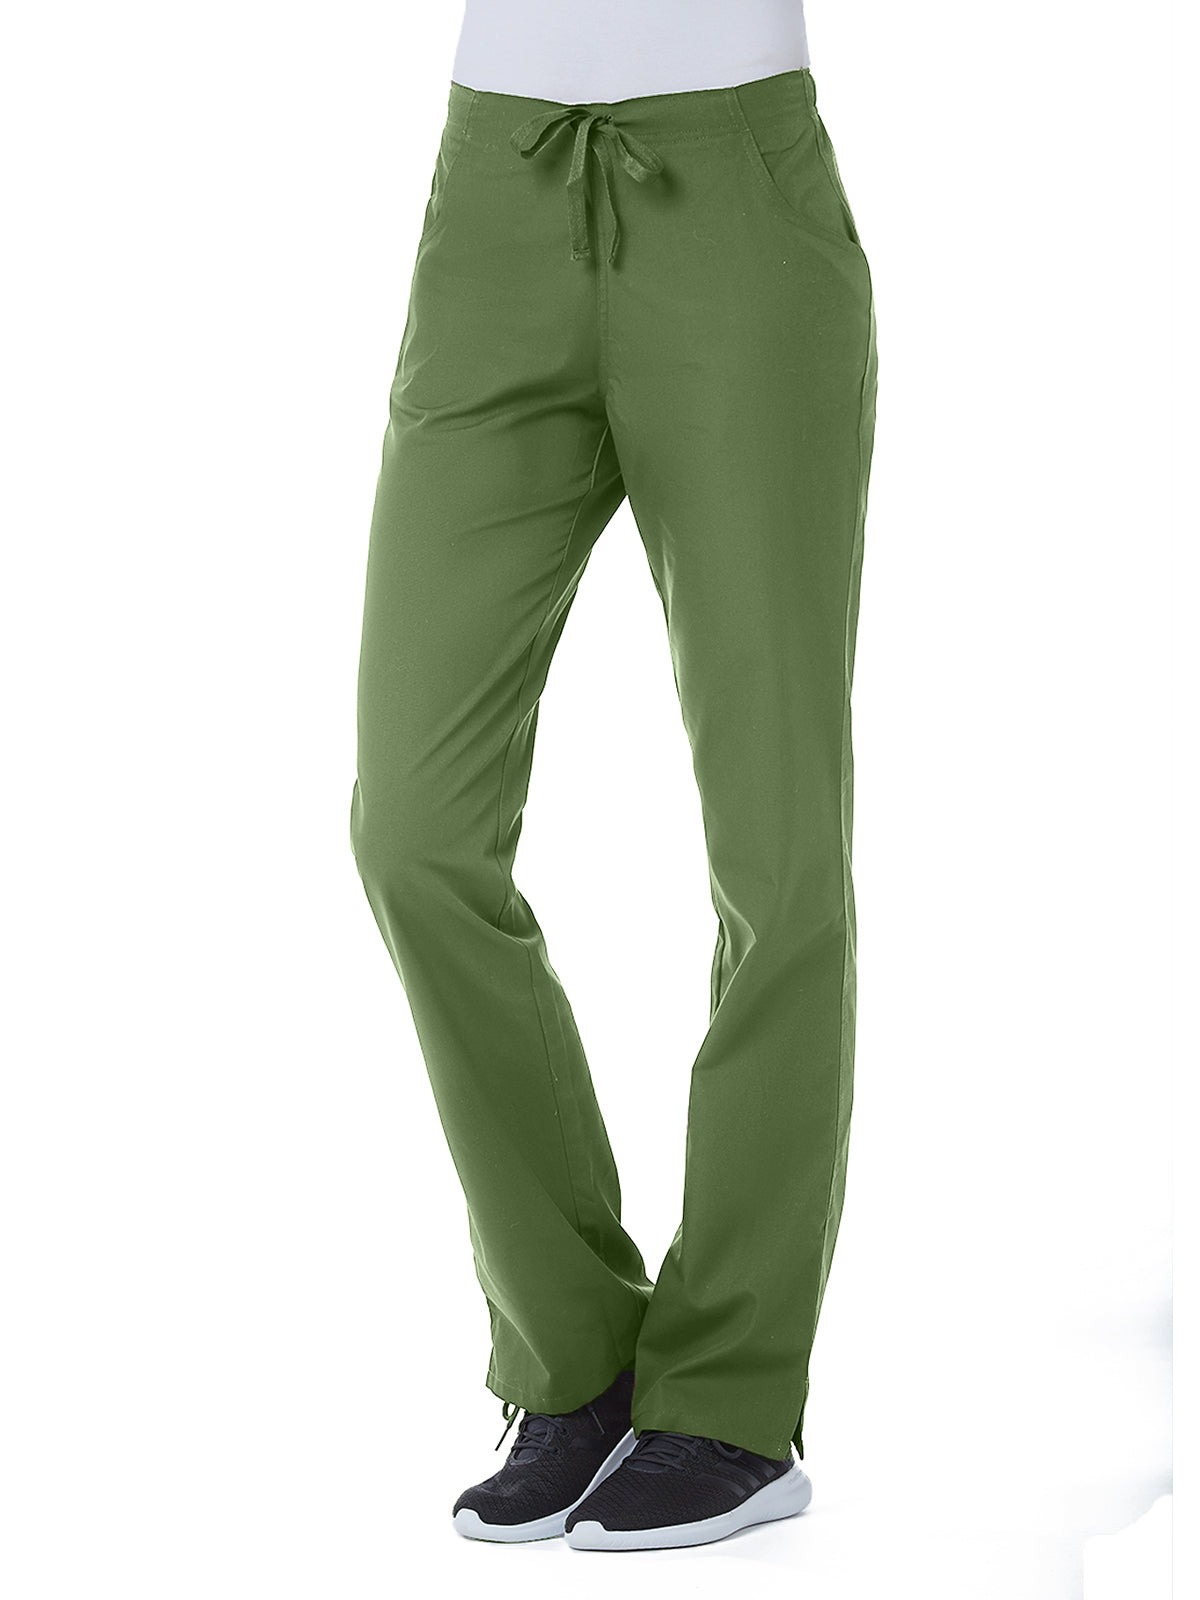 Women's Exceptionally Soft Pant - 9716 - Olive